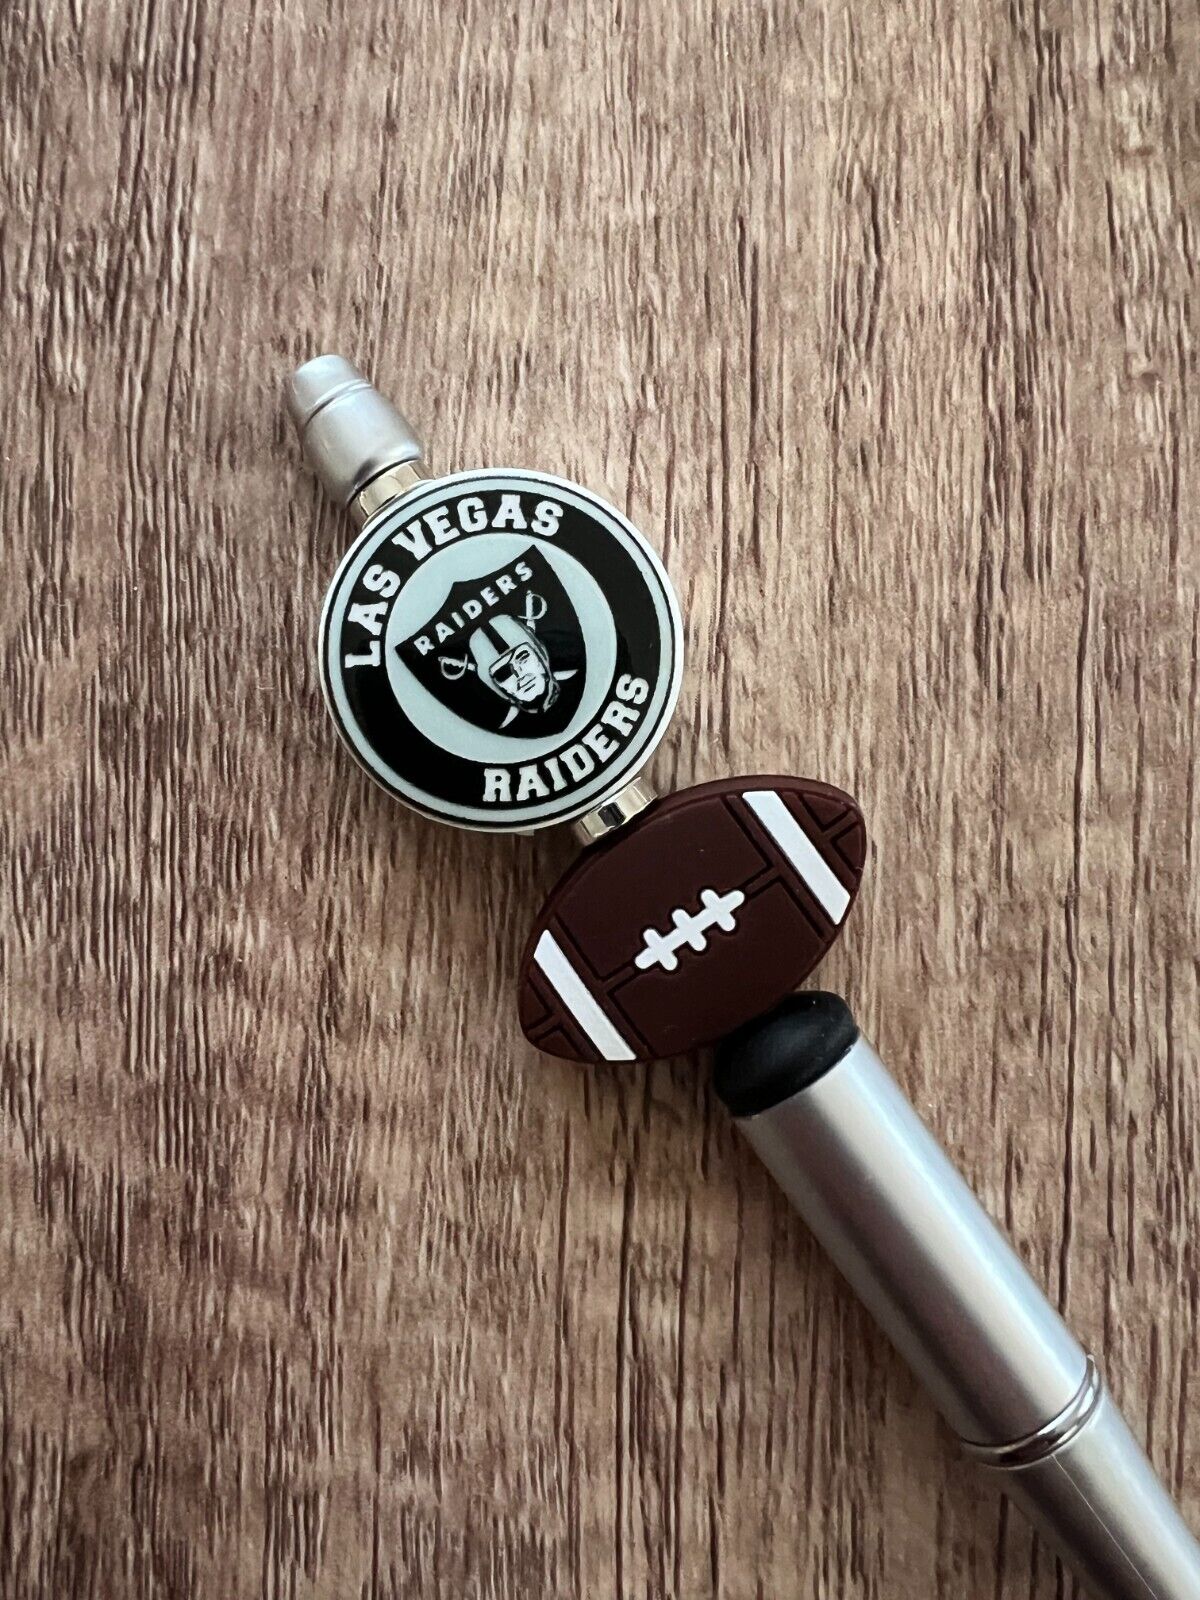 Football Pen. Raiders, Cowboys, Patriots, Dolphins, Titans, and Giants